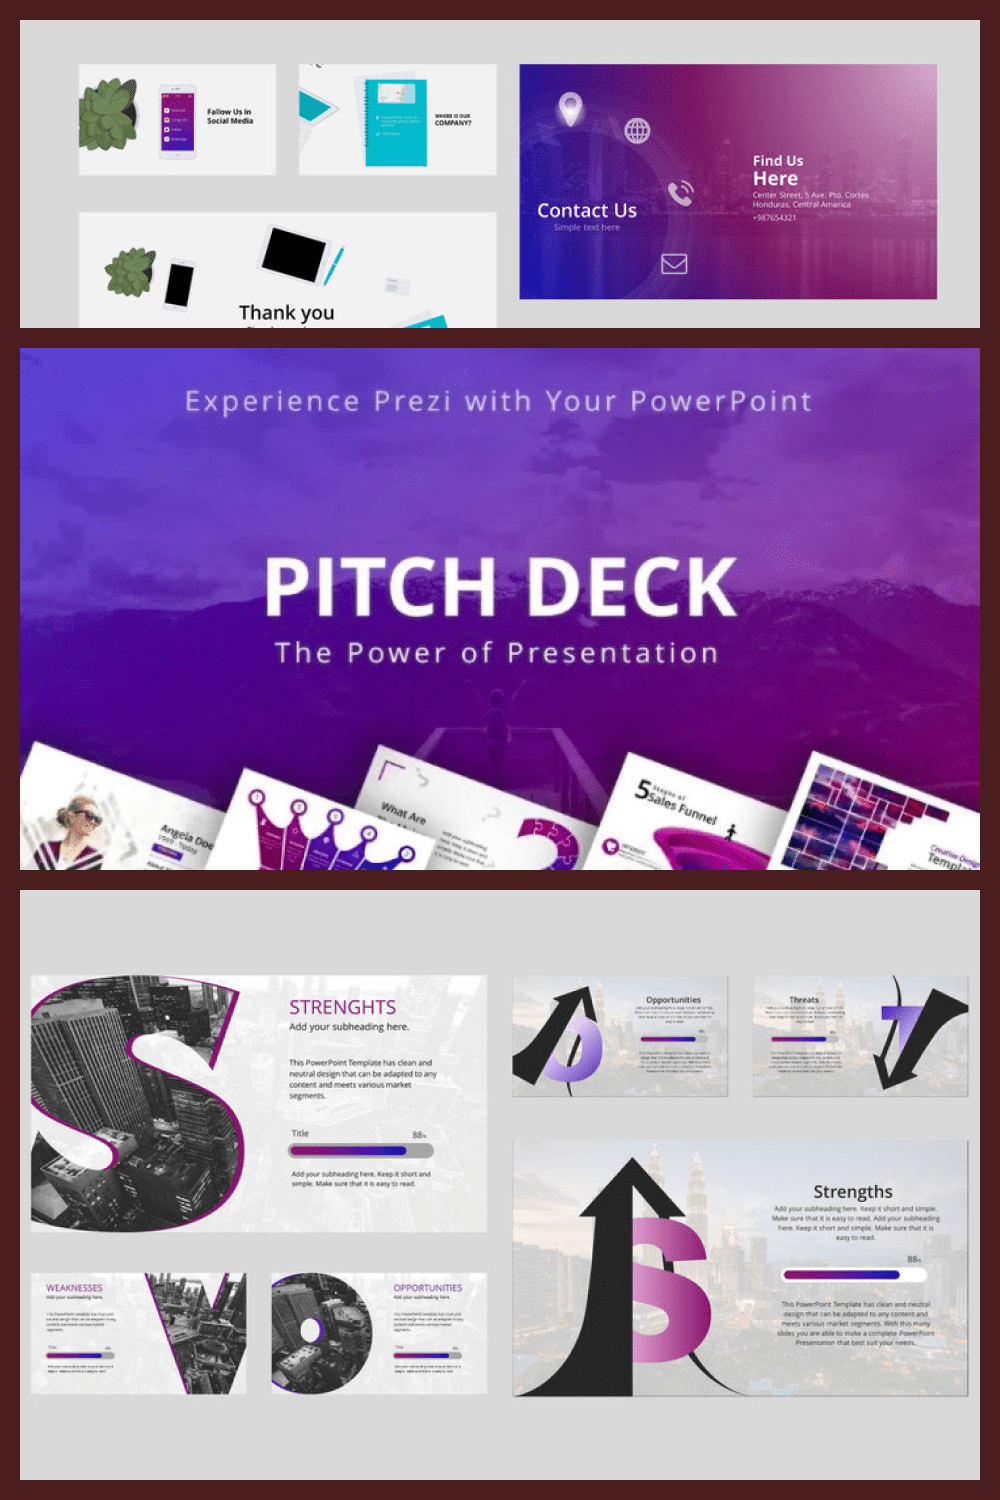 Pitch deck powerpoint template.